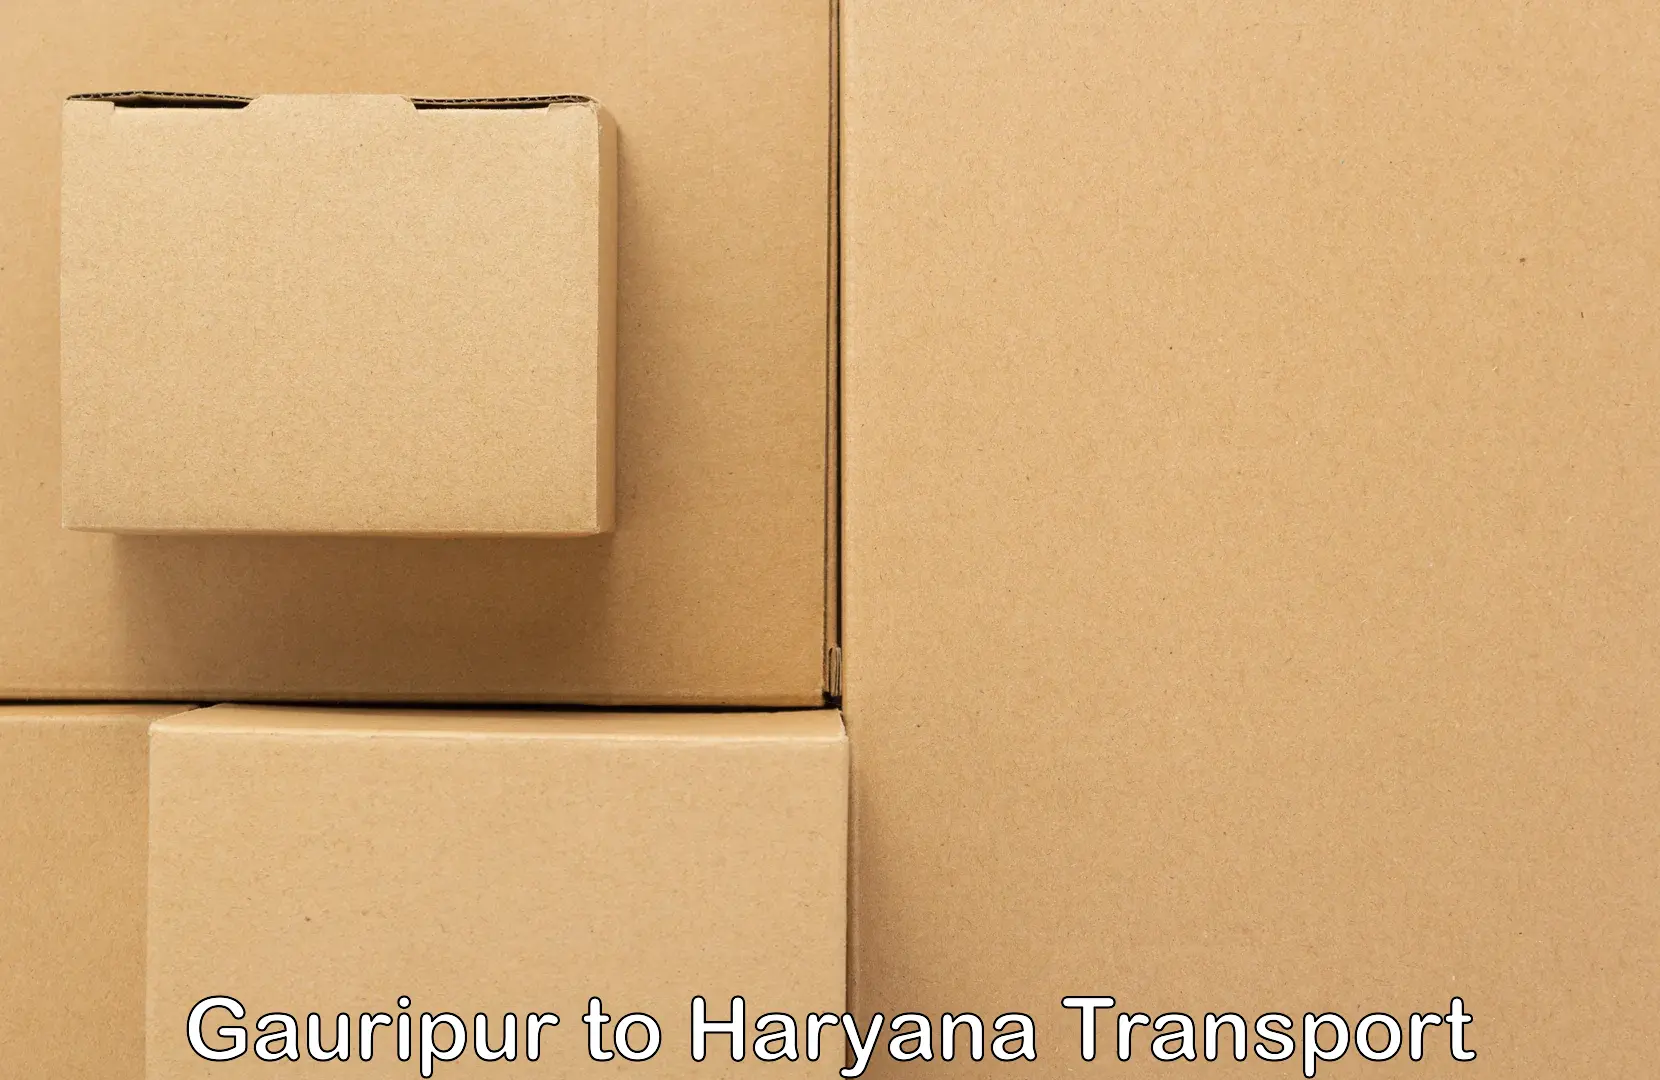 Truck transport companies in India Gauripur to Chaudhary Charan Singh Haryana Agricultural University Hisar